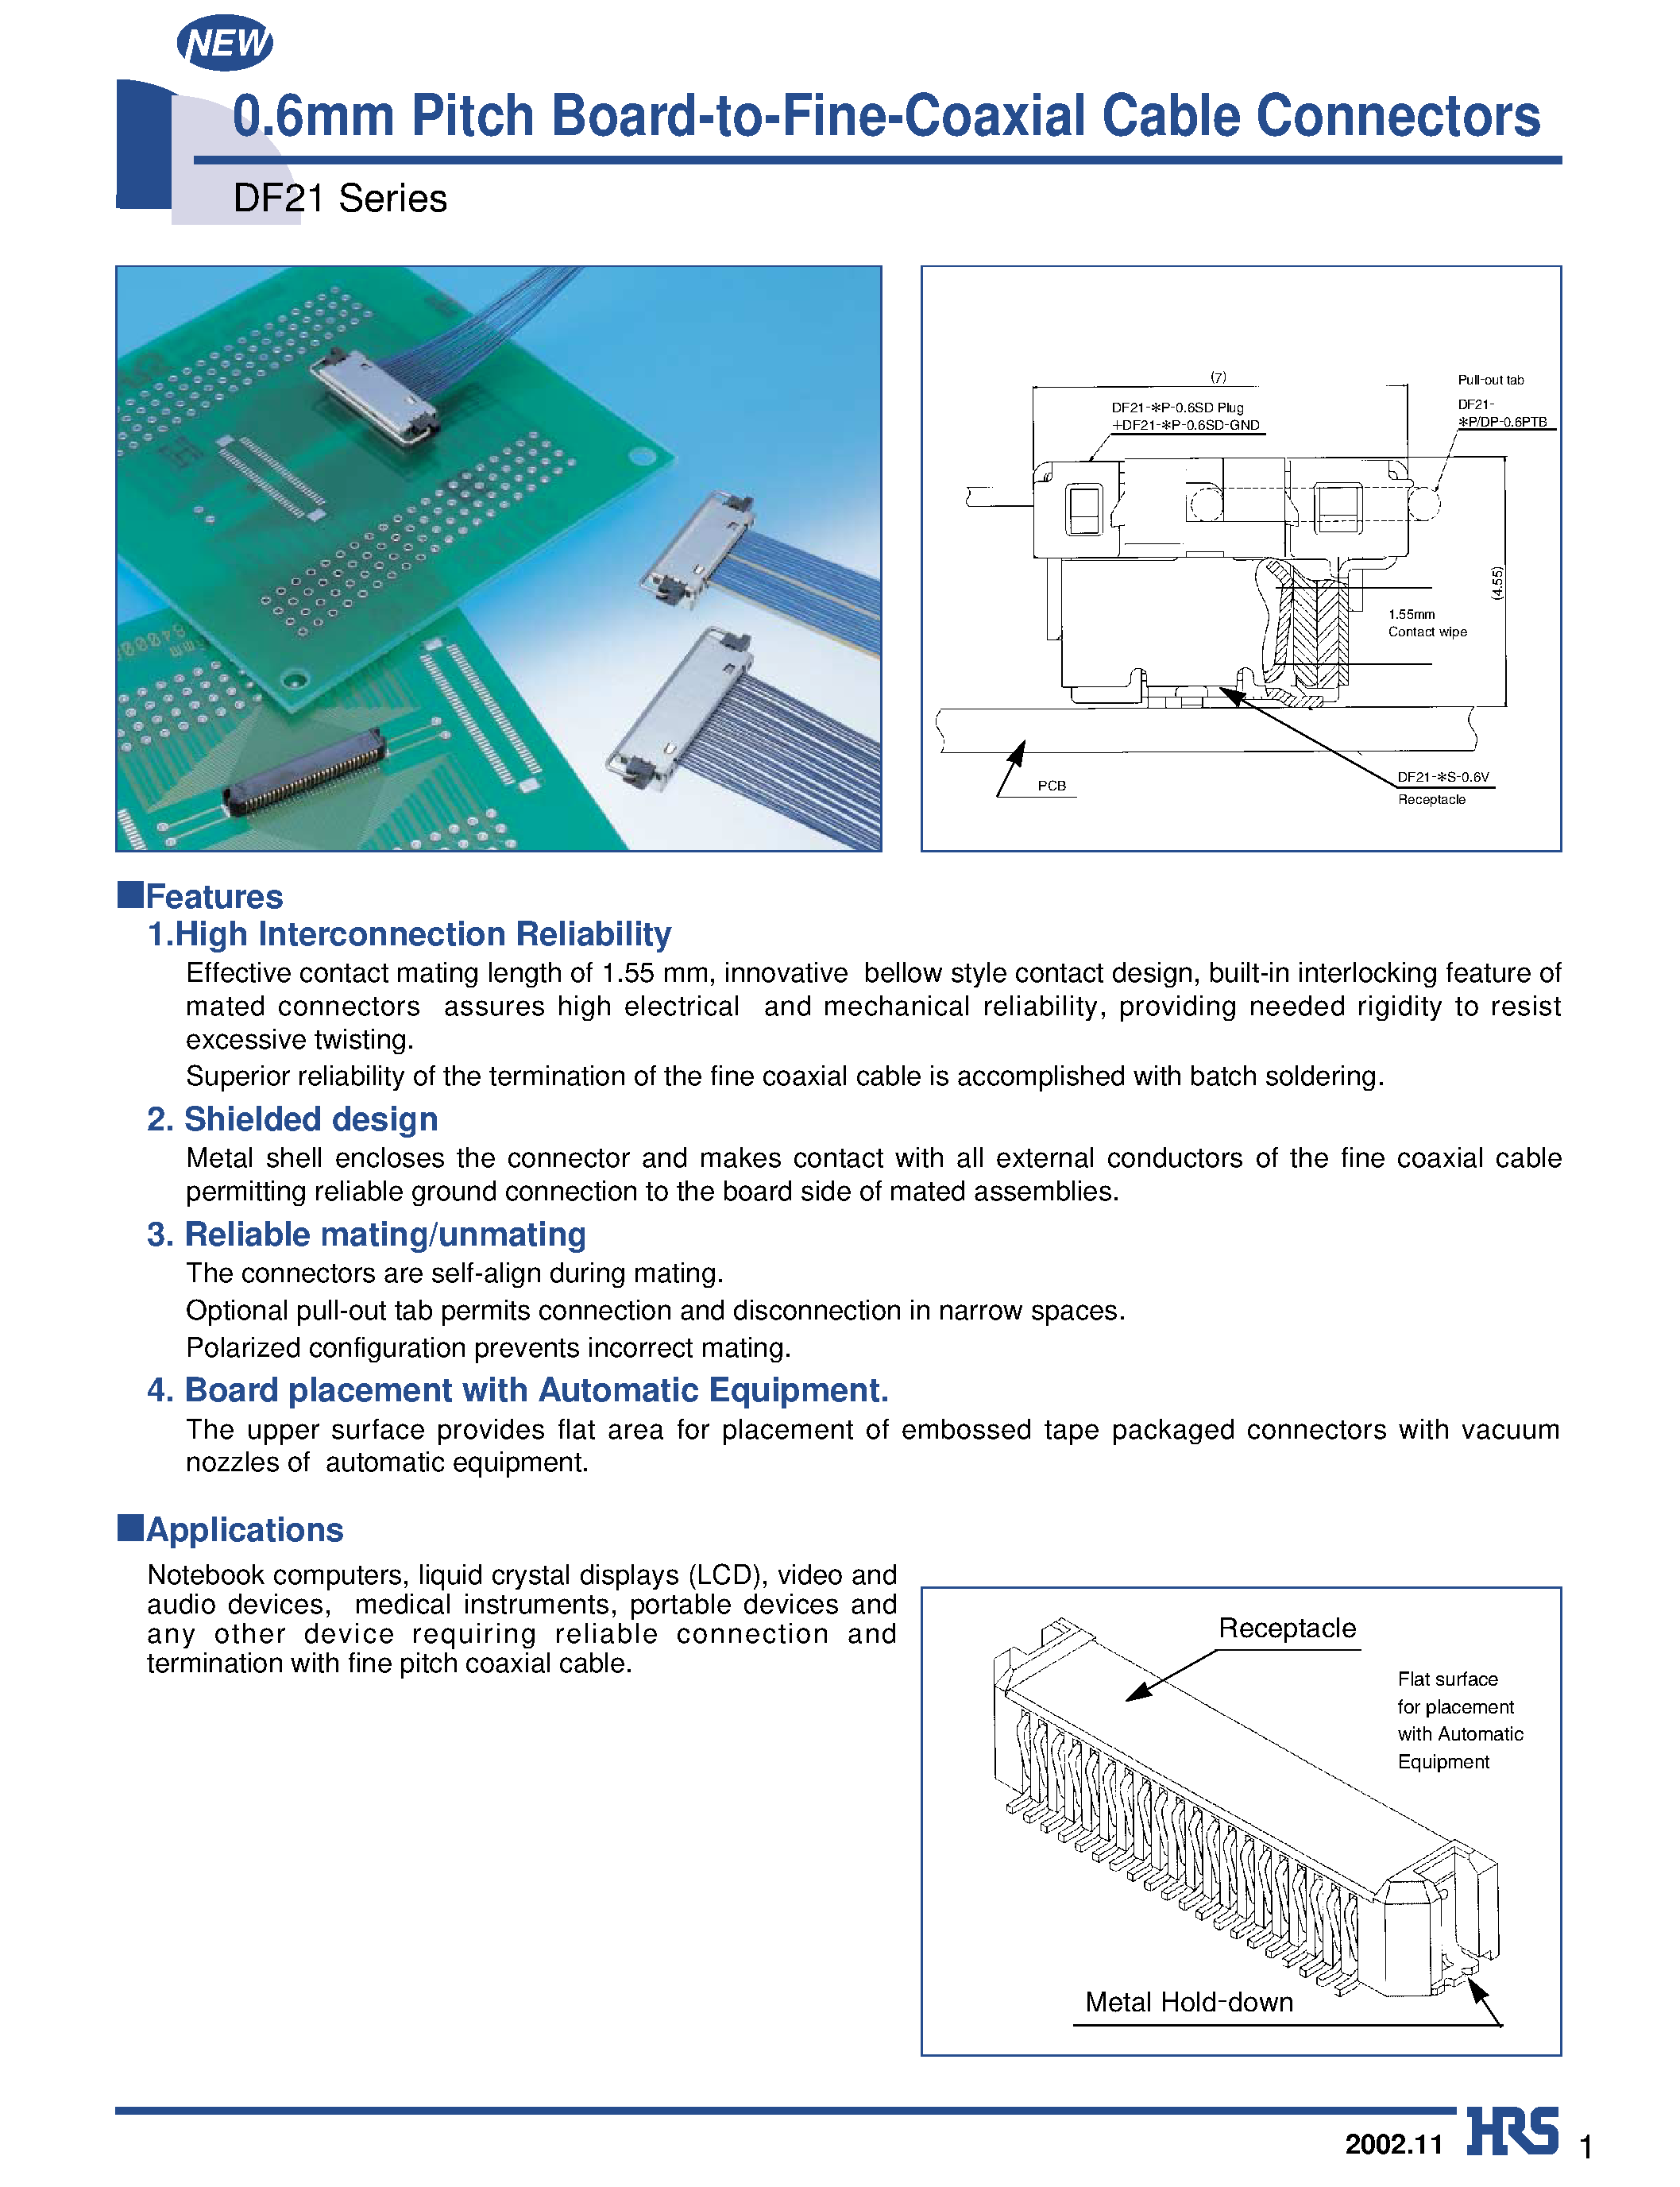 Datasheet DF21-20P-0.6PTB - 0.6mm Pitch Board-to-Fine-Coaxial Cable Connectors page 1